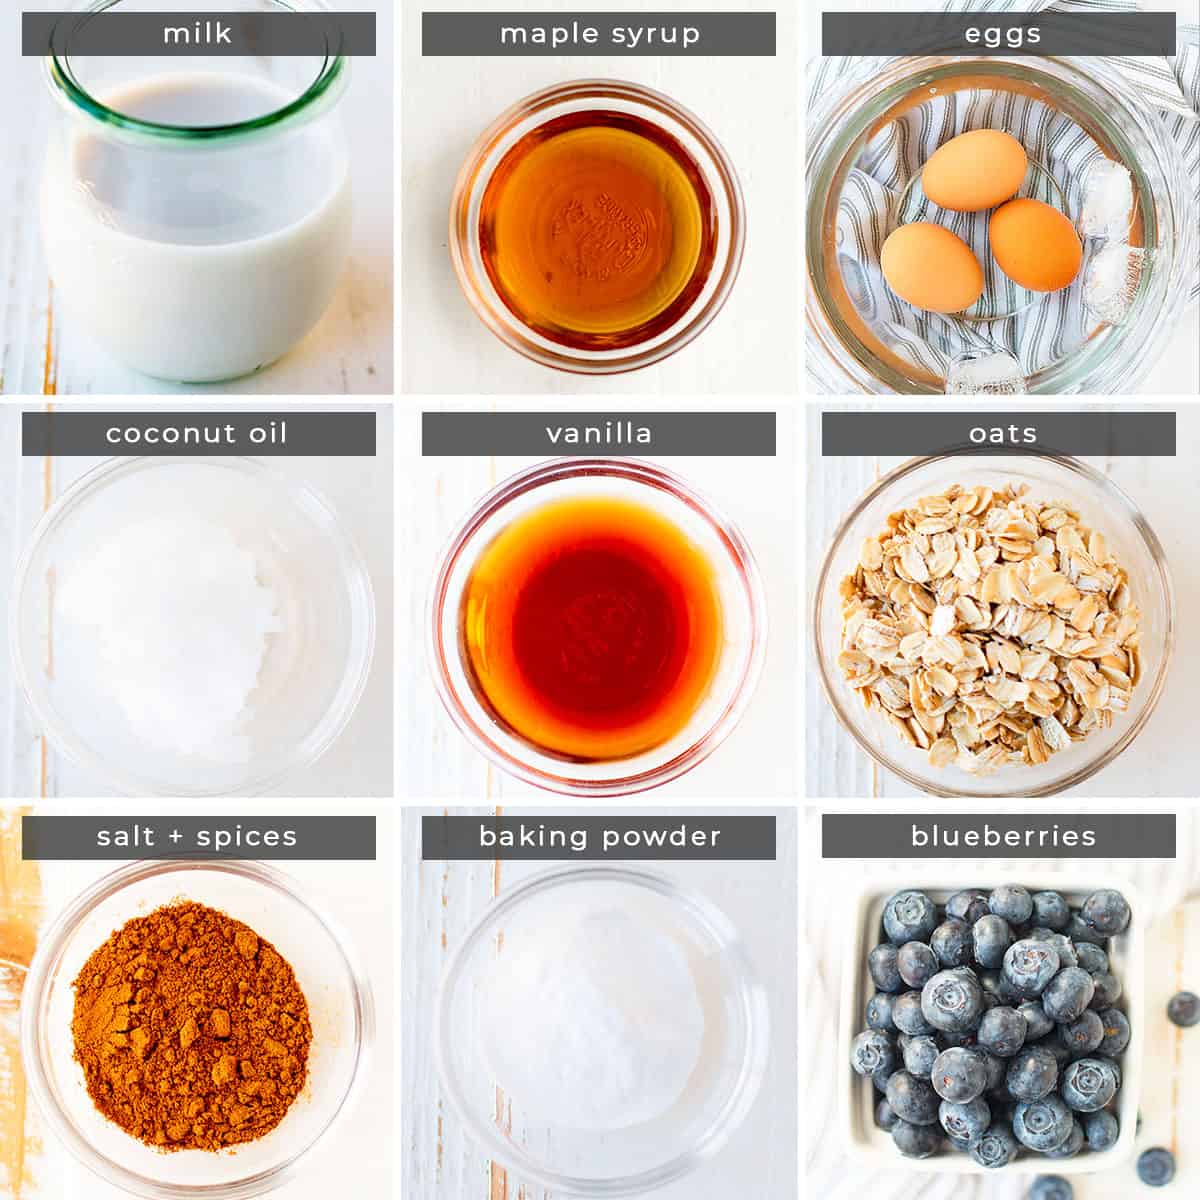 Image containing recipe ingredients: milk, maple syrup, eggs, coconut oil, vanilla, oats, salt + spices, baking powder, and blueberries.